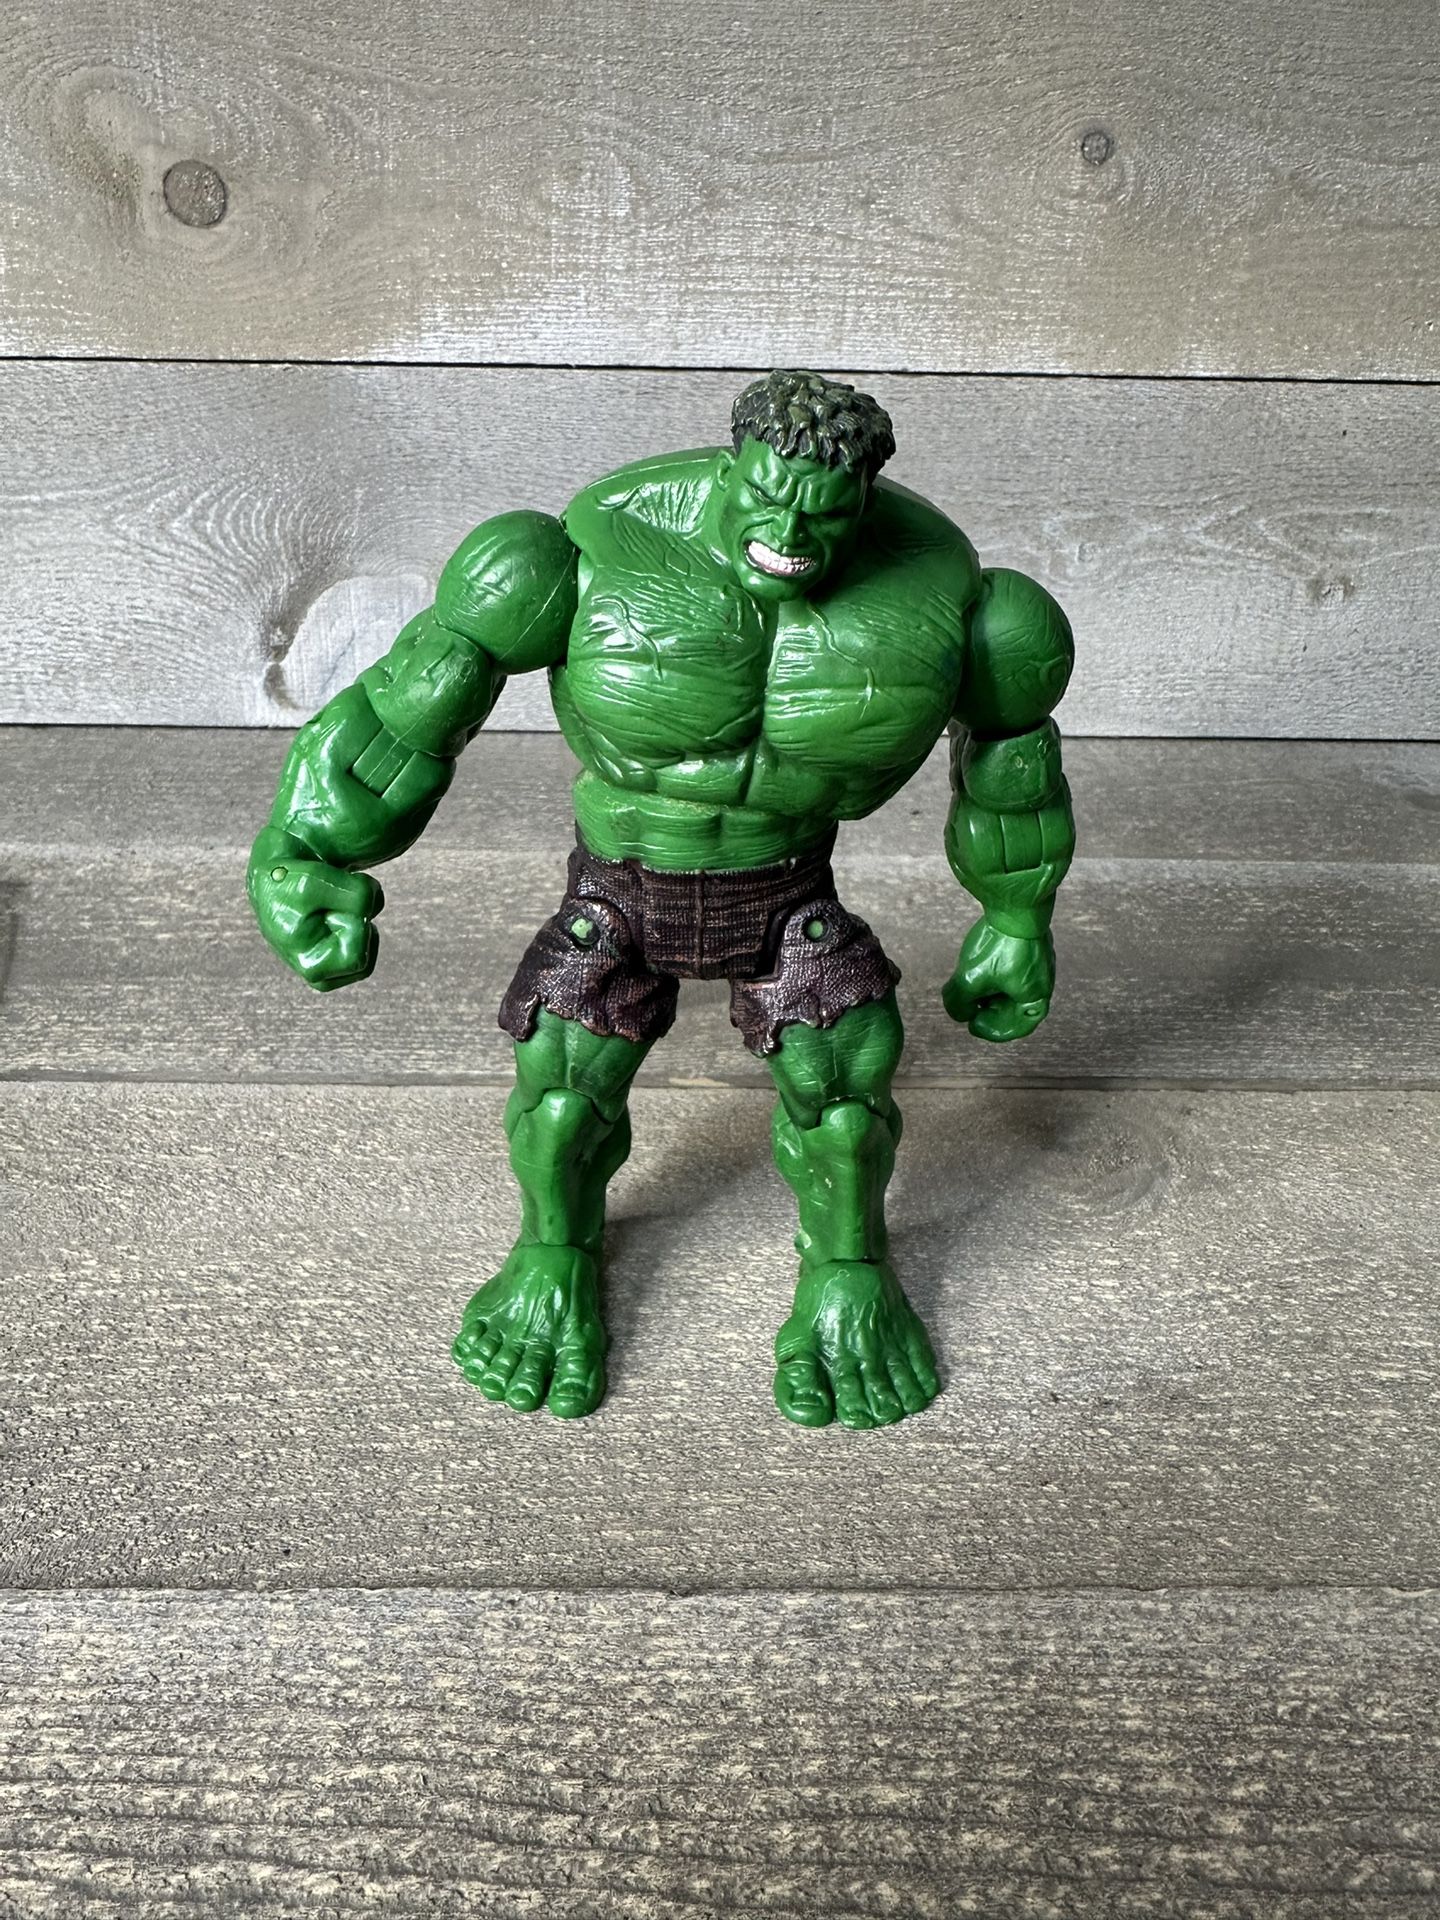 2002 Marvel The Incredible Hulk Movie 6" Action Figure Loose Super Posable